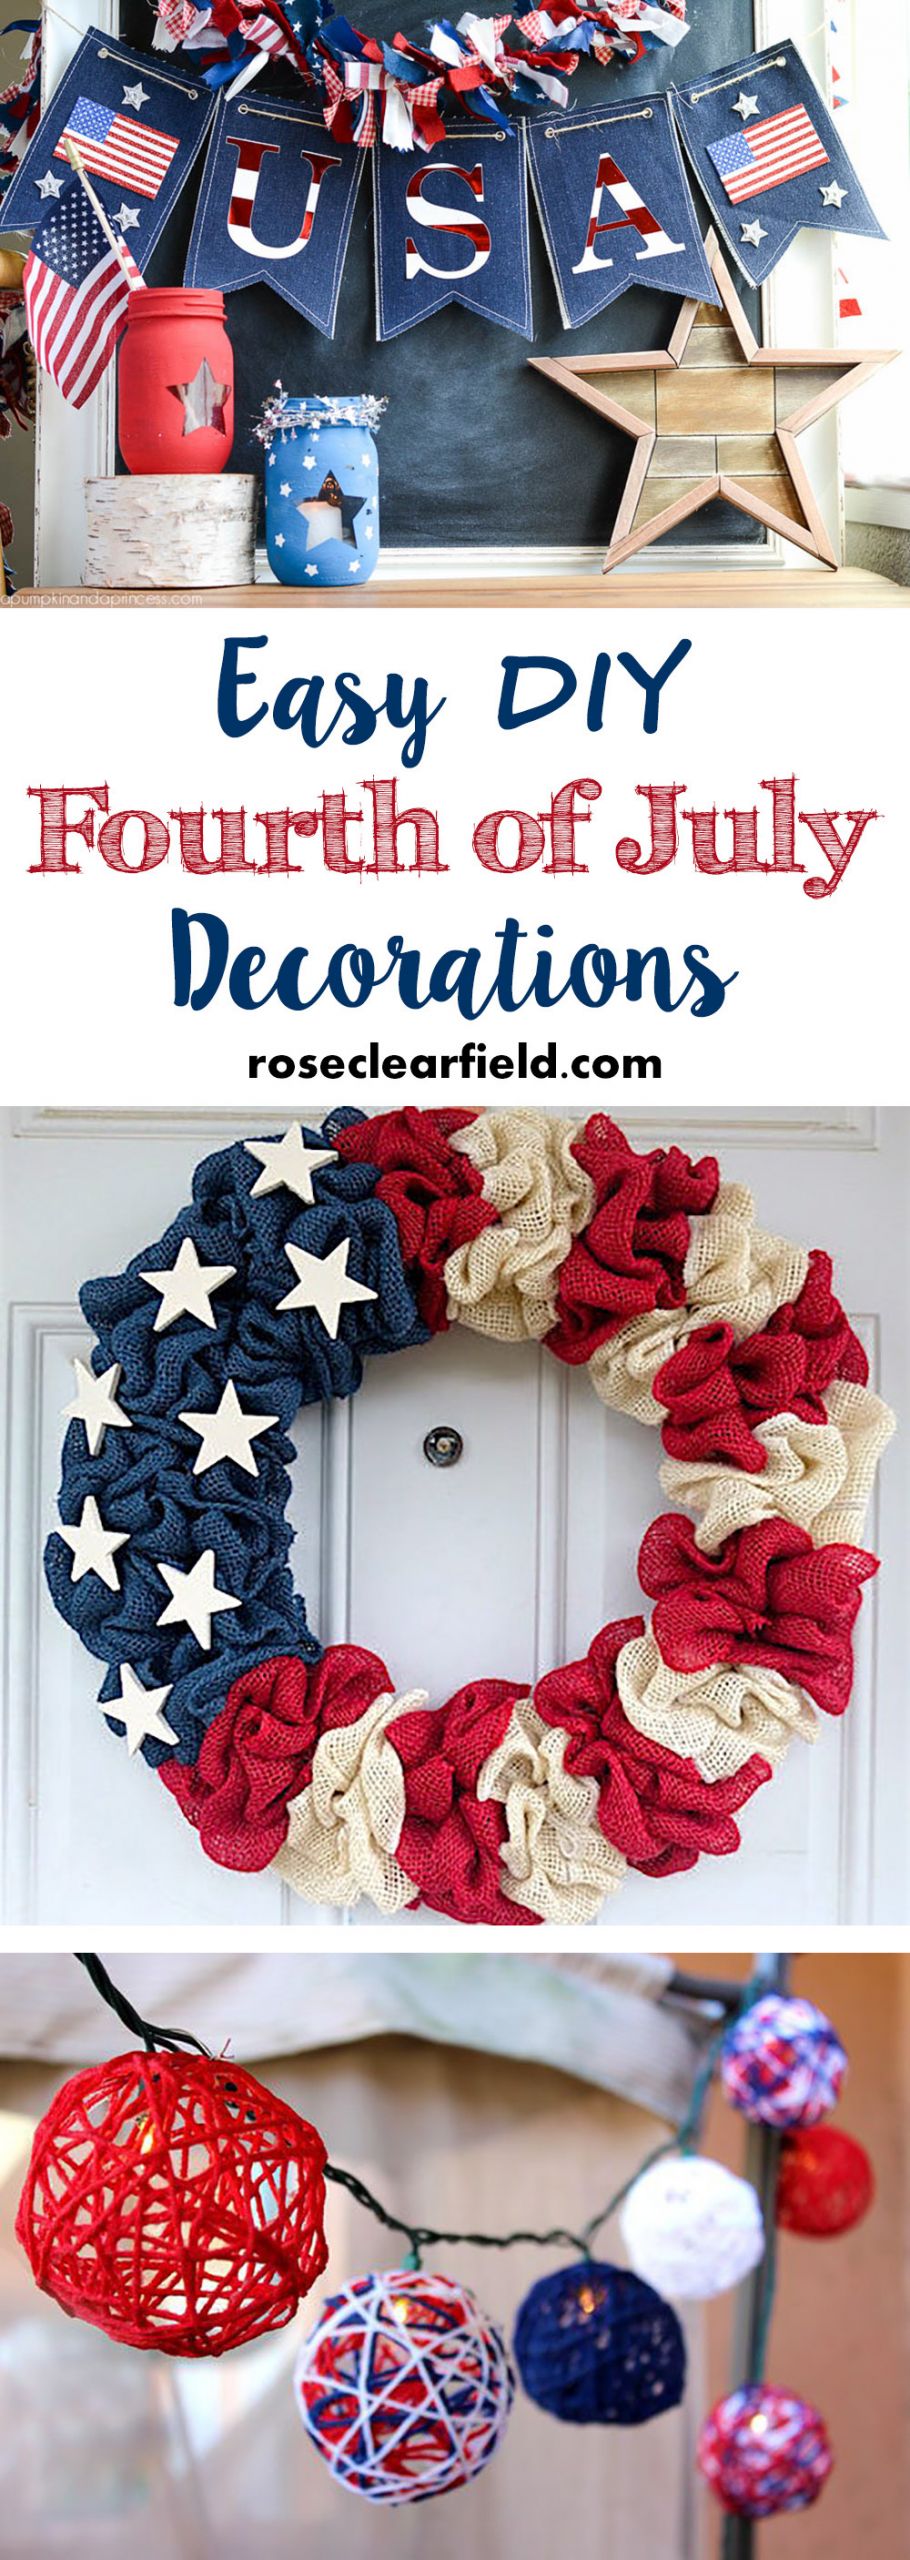 4th Of July Decor
 Easy DIY Fourth of July Decorations • Rose Clearfield